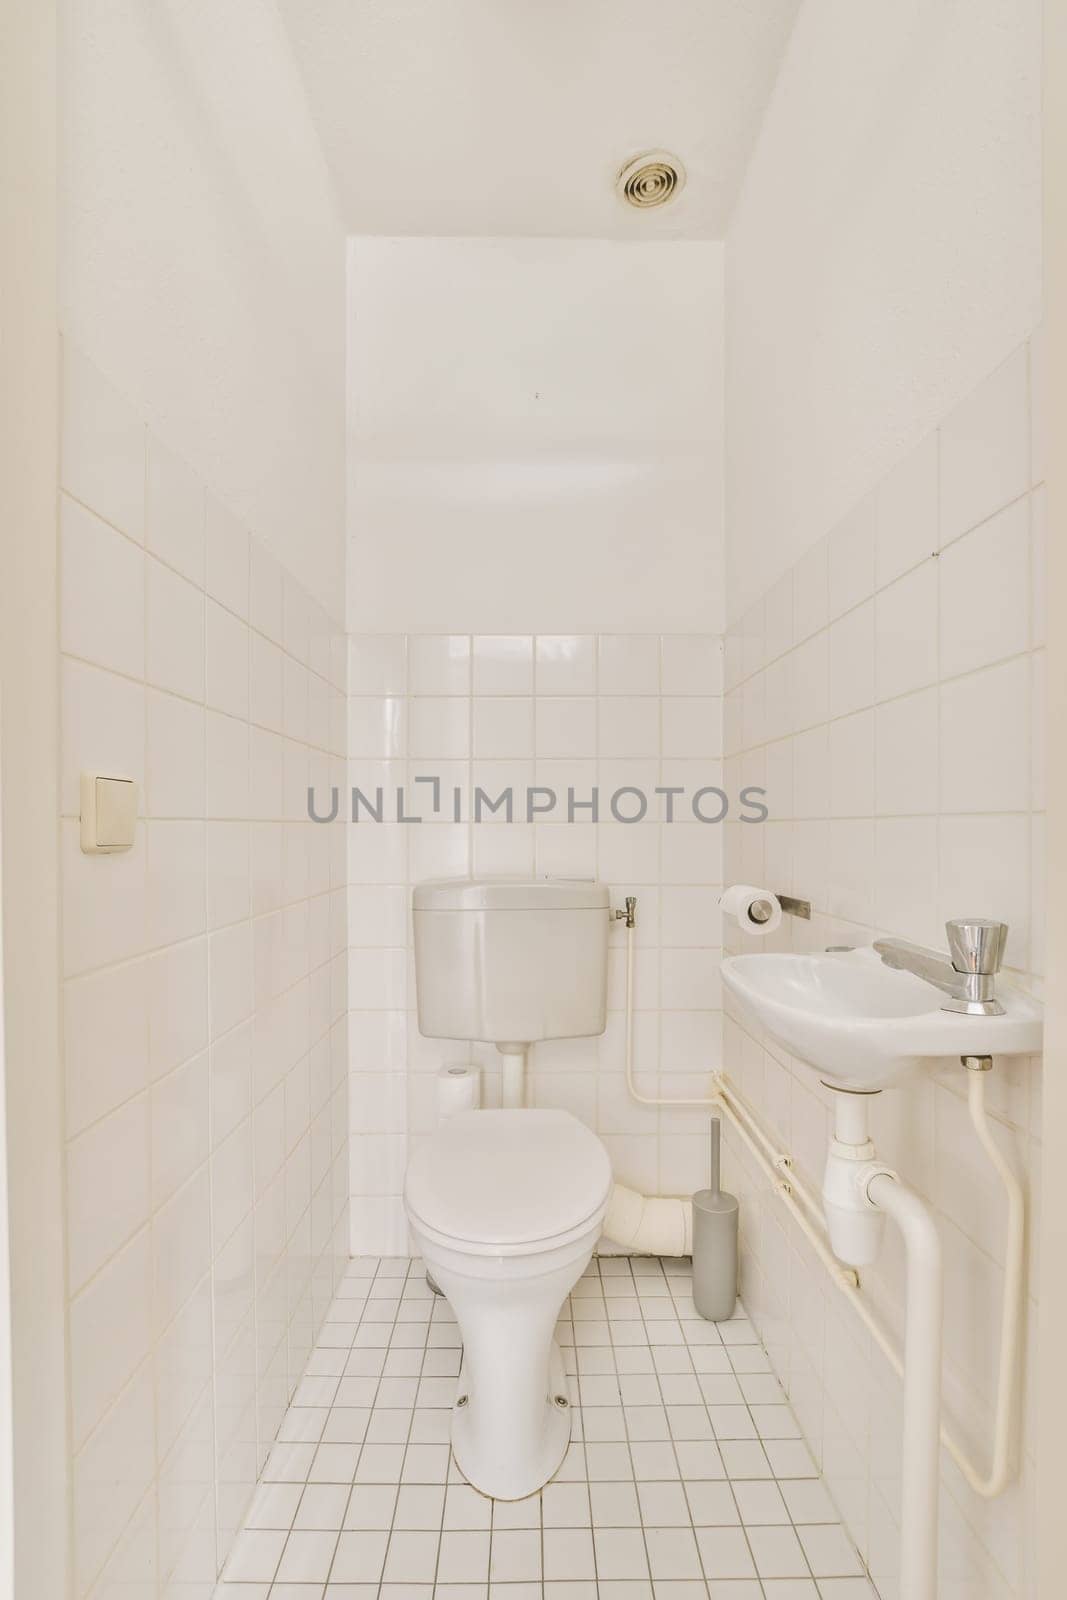 a bathroom with white tiles on the walls and floor, including a toilet in the middle part of the room